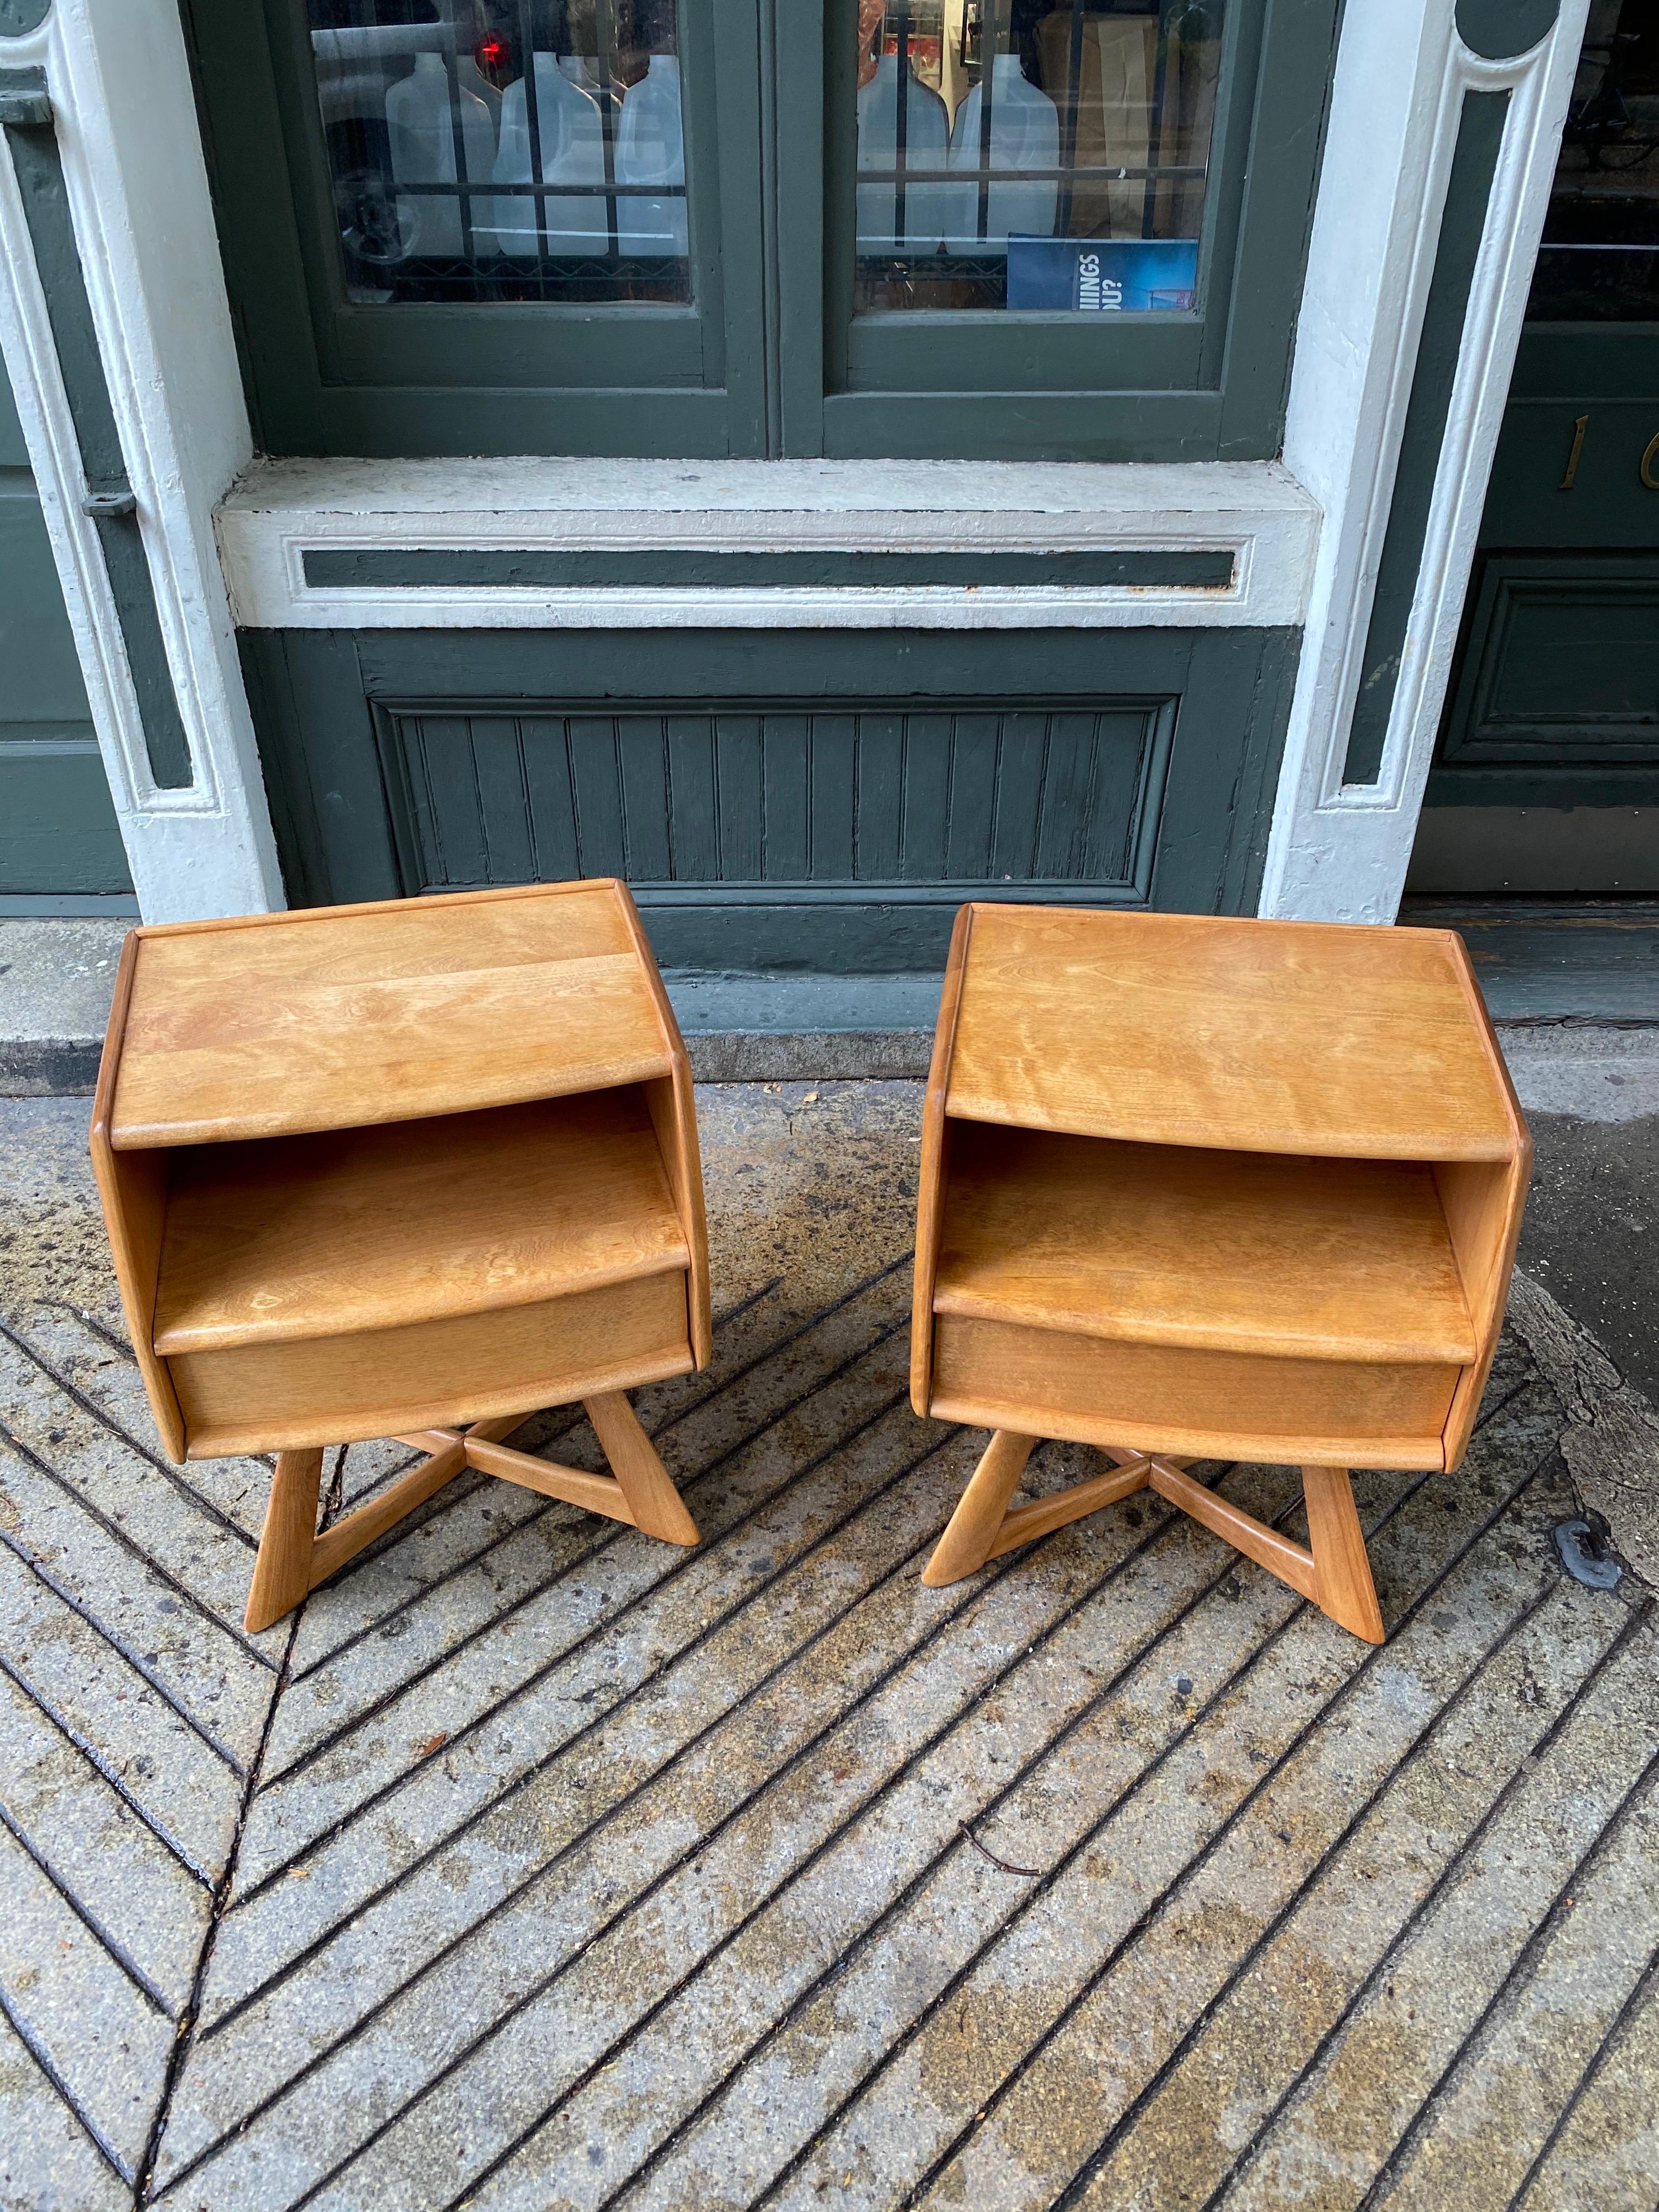 Heywood Wakefield pair of Sculptura nightstands, newly refinished and ready to go! The Sculptura Line came out in the mid-1950s and was one of their most popular! The nightstands with their X-base design is truly an original design that sets this